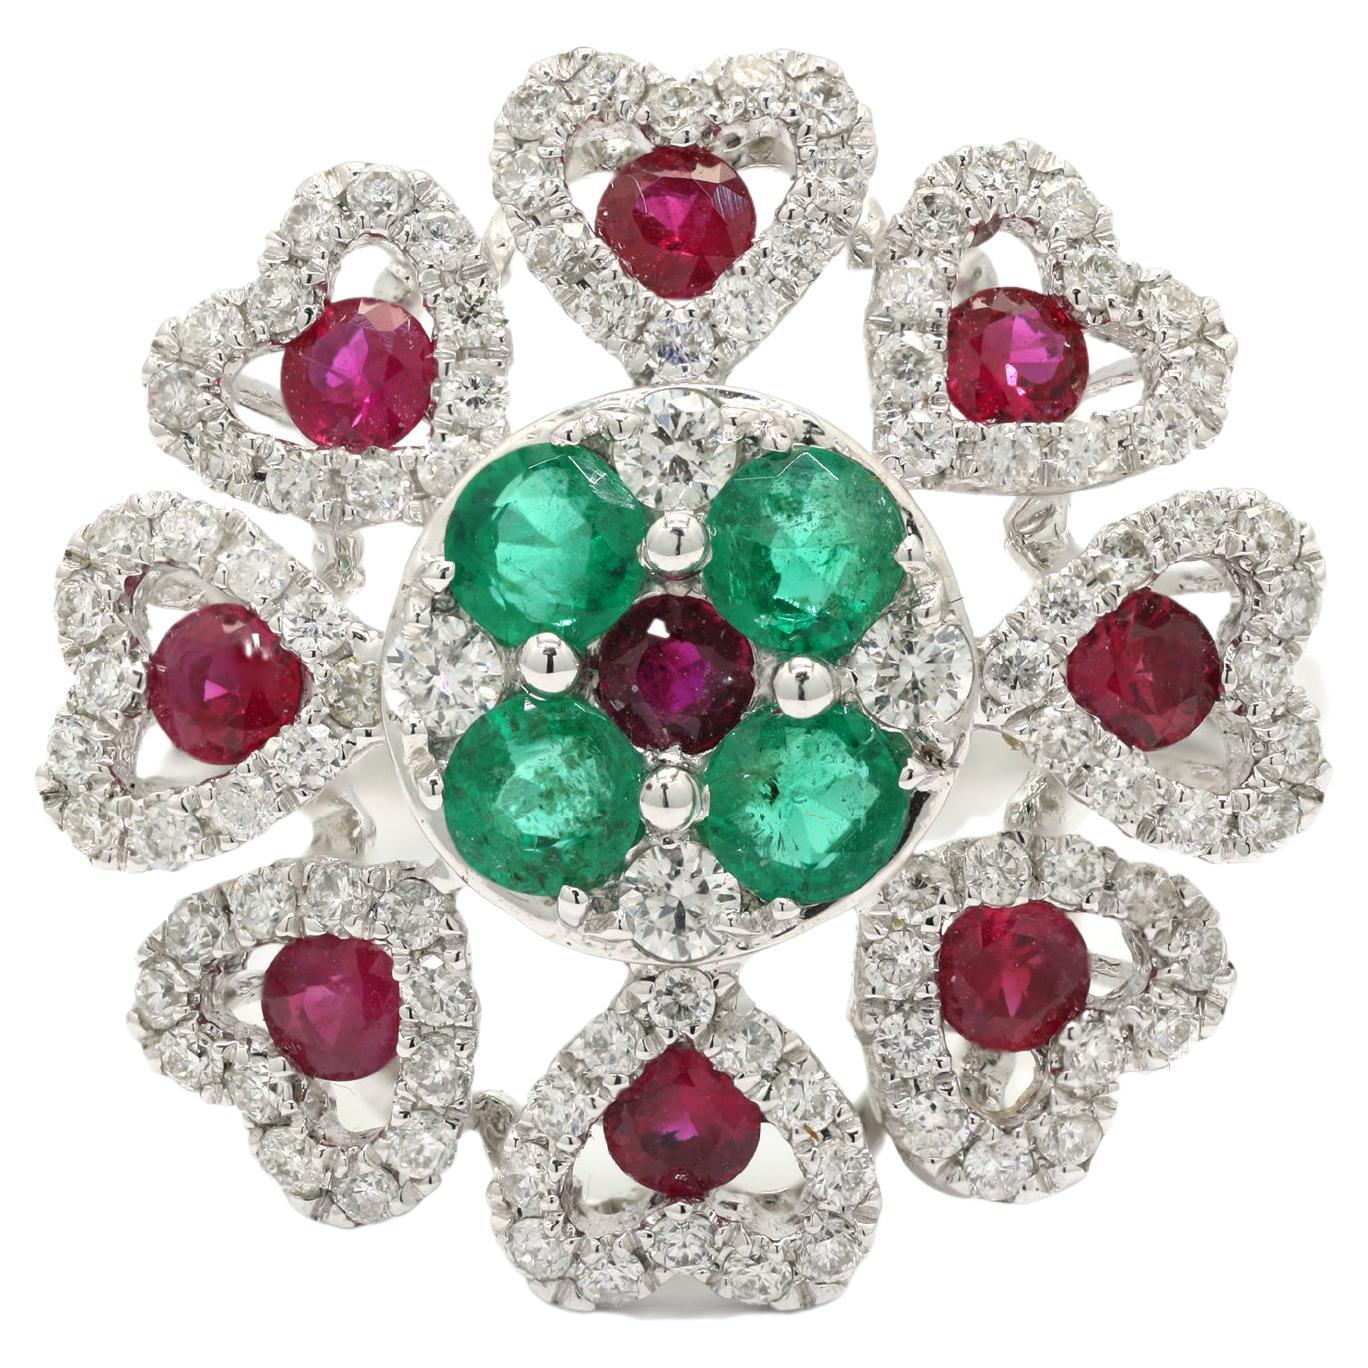 For Sale:  14K White Gold Emerald and Ruby Floral Cocktail Ring with Diamonds